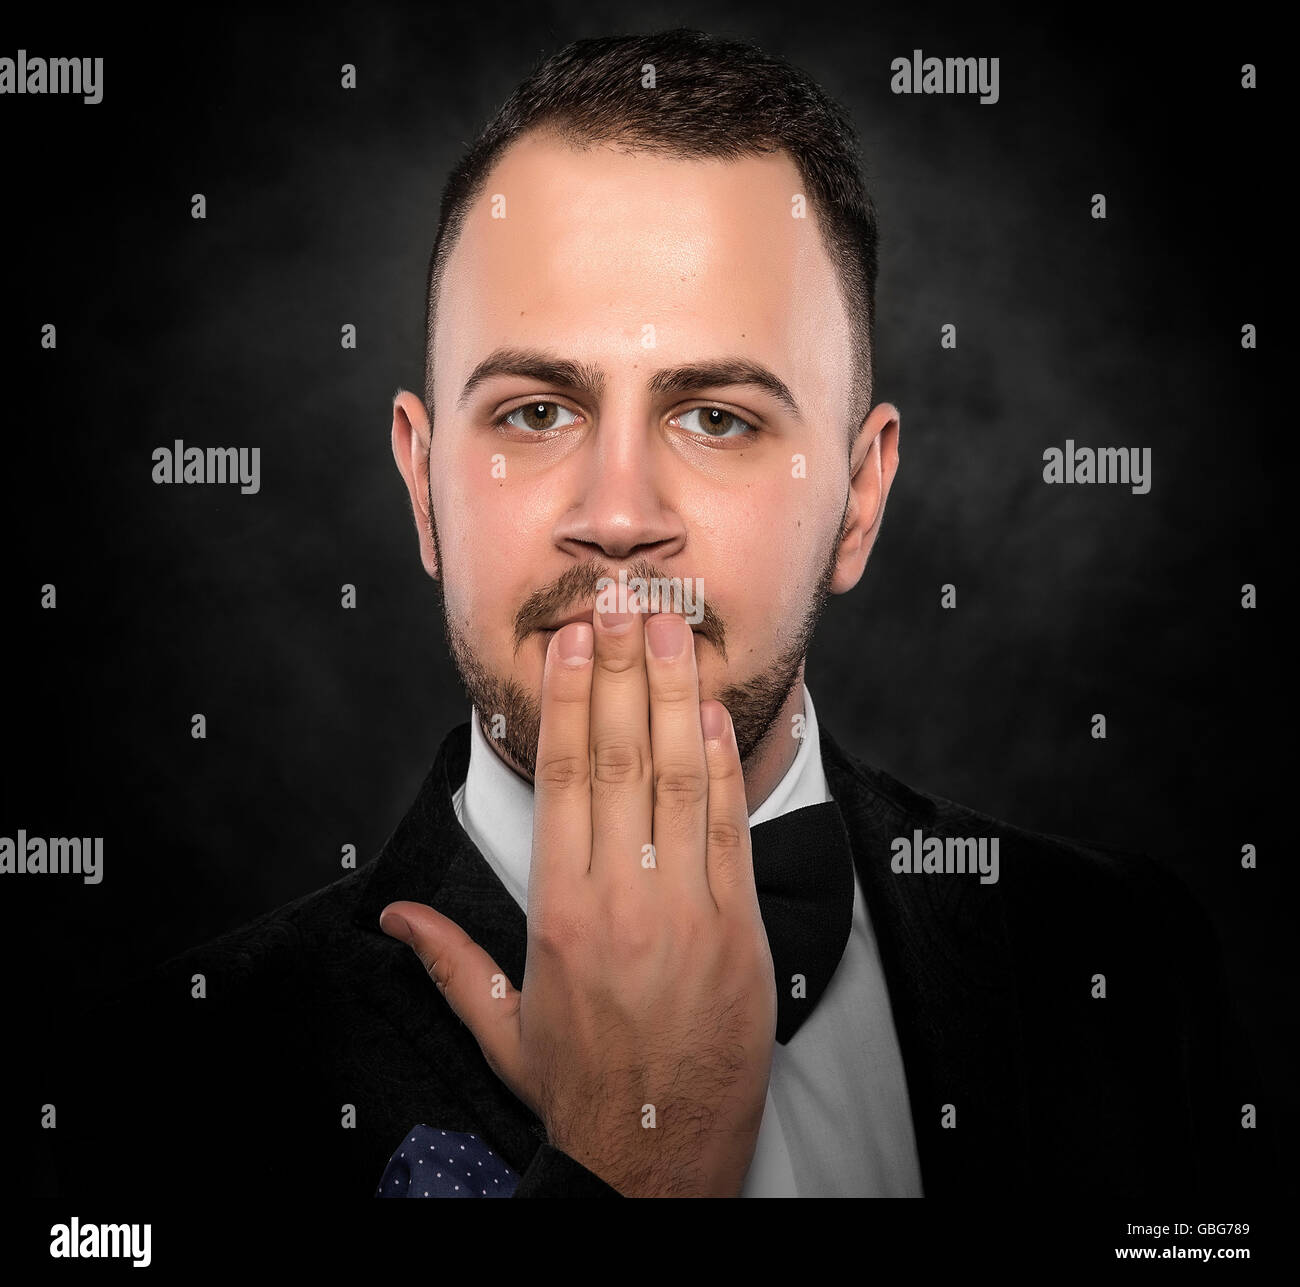 Funny man in suit hand covering mouth over dark background. Stock Photo